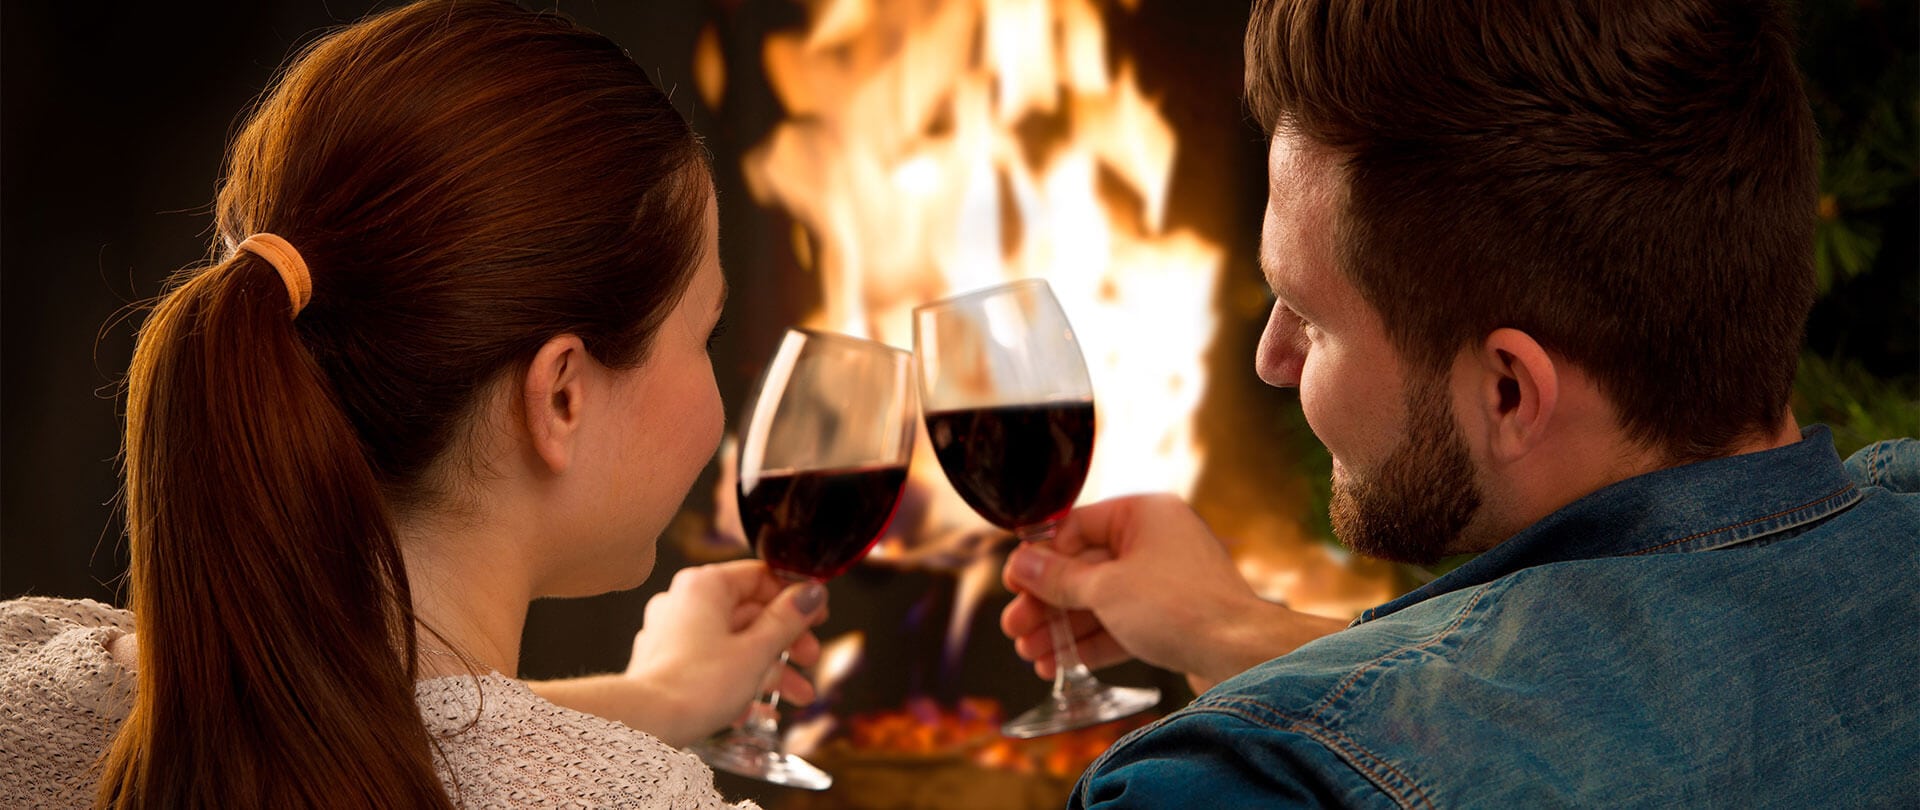 Couple toasting in front of a fireplace